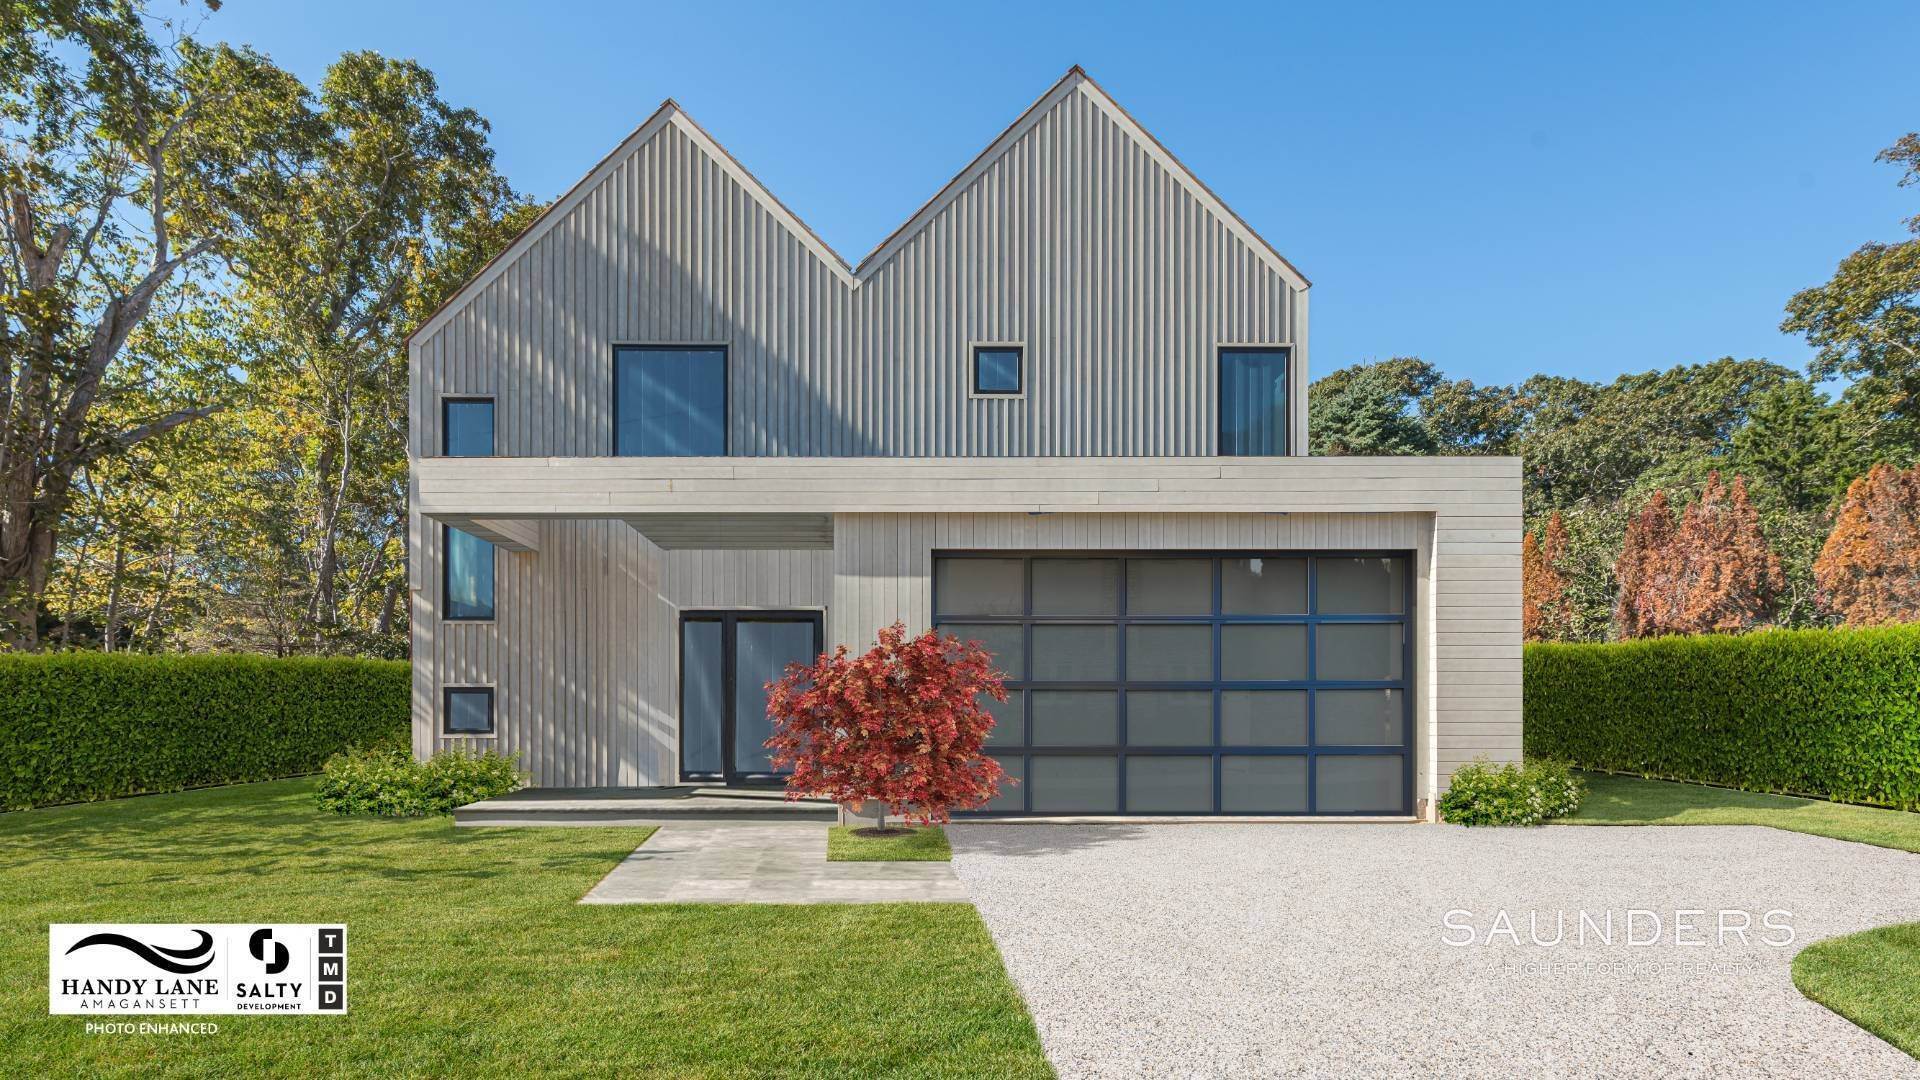 Single Family Homes for Sale at Amagansett South Of The Highway-New Construction 24 Handy Lane, Amagansett, NY 11930